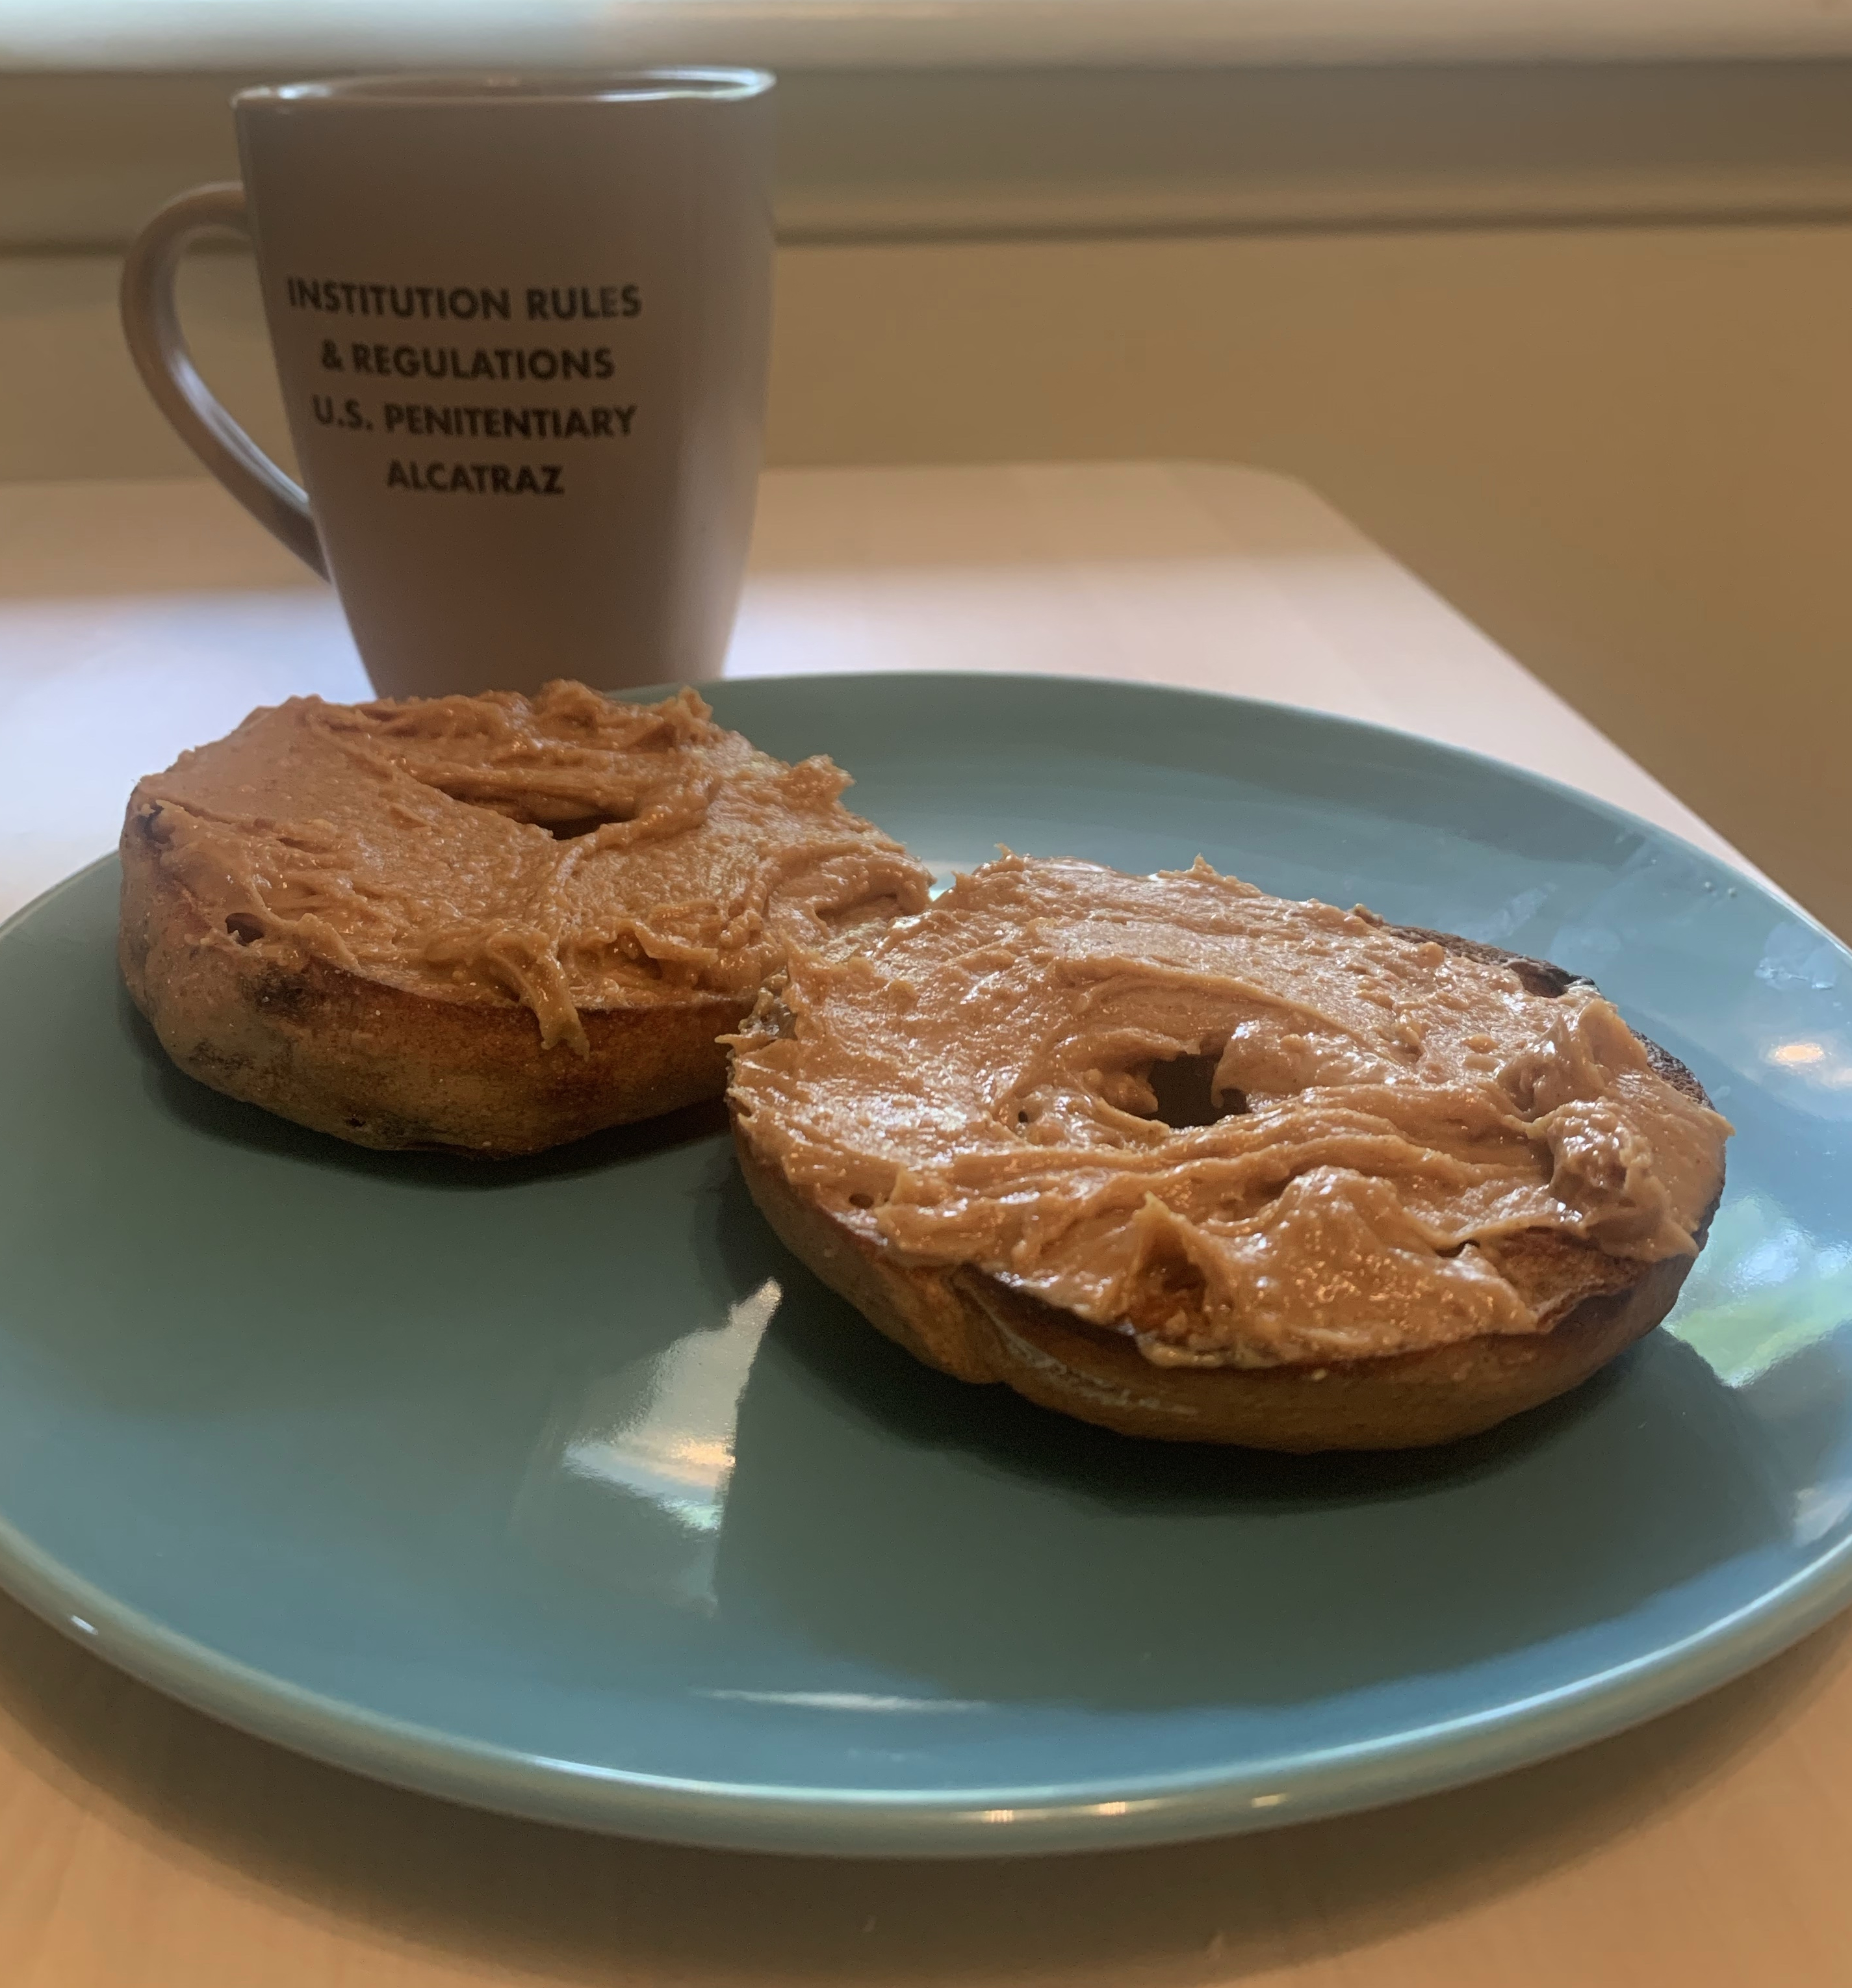 open faced bagel topped with peanut butter and honey on a blue plate in front of a coffee cup that reads "institution rules & regulations u.s. penitentiary alcatraz"